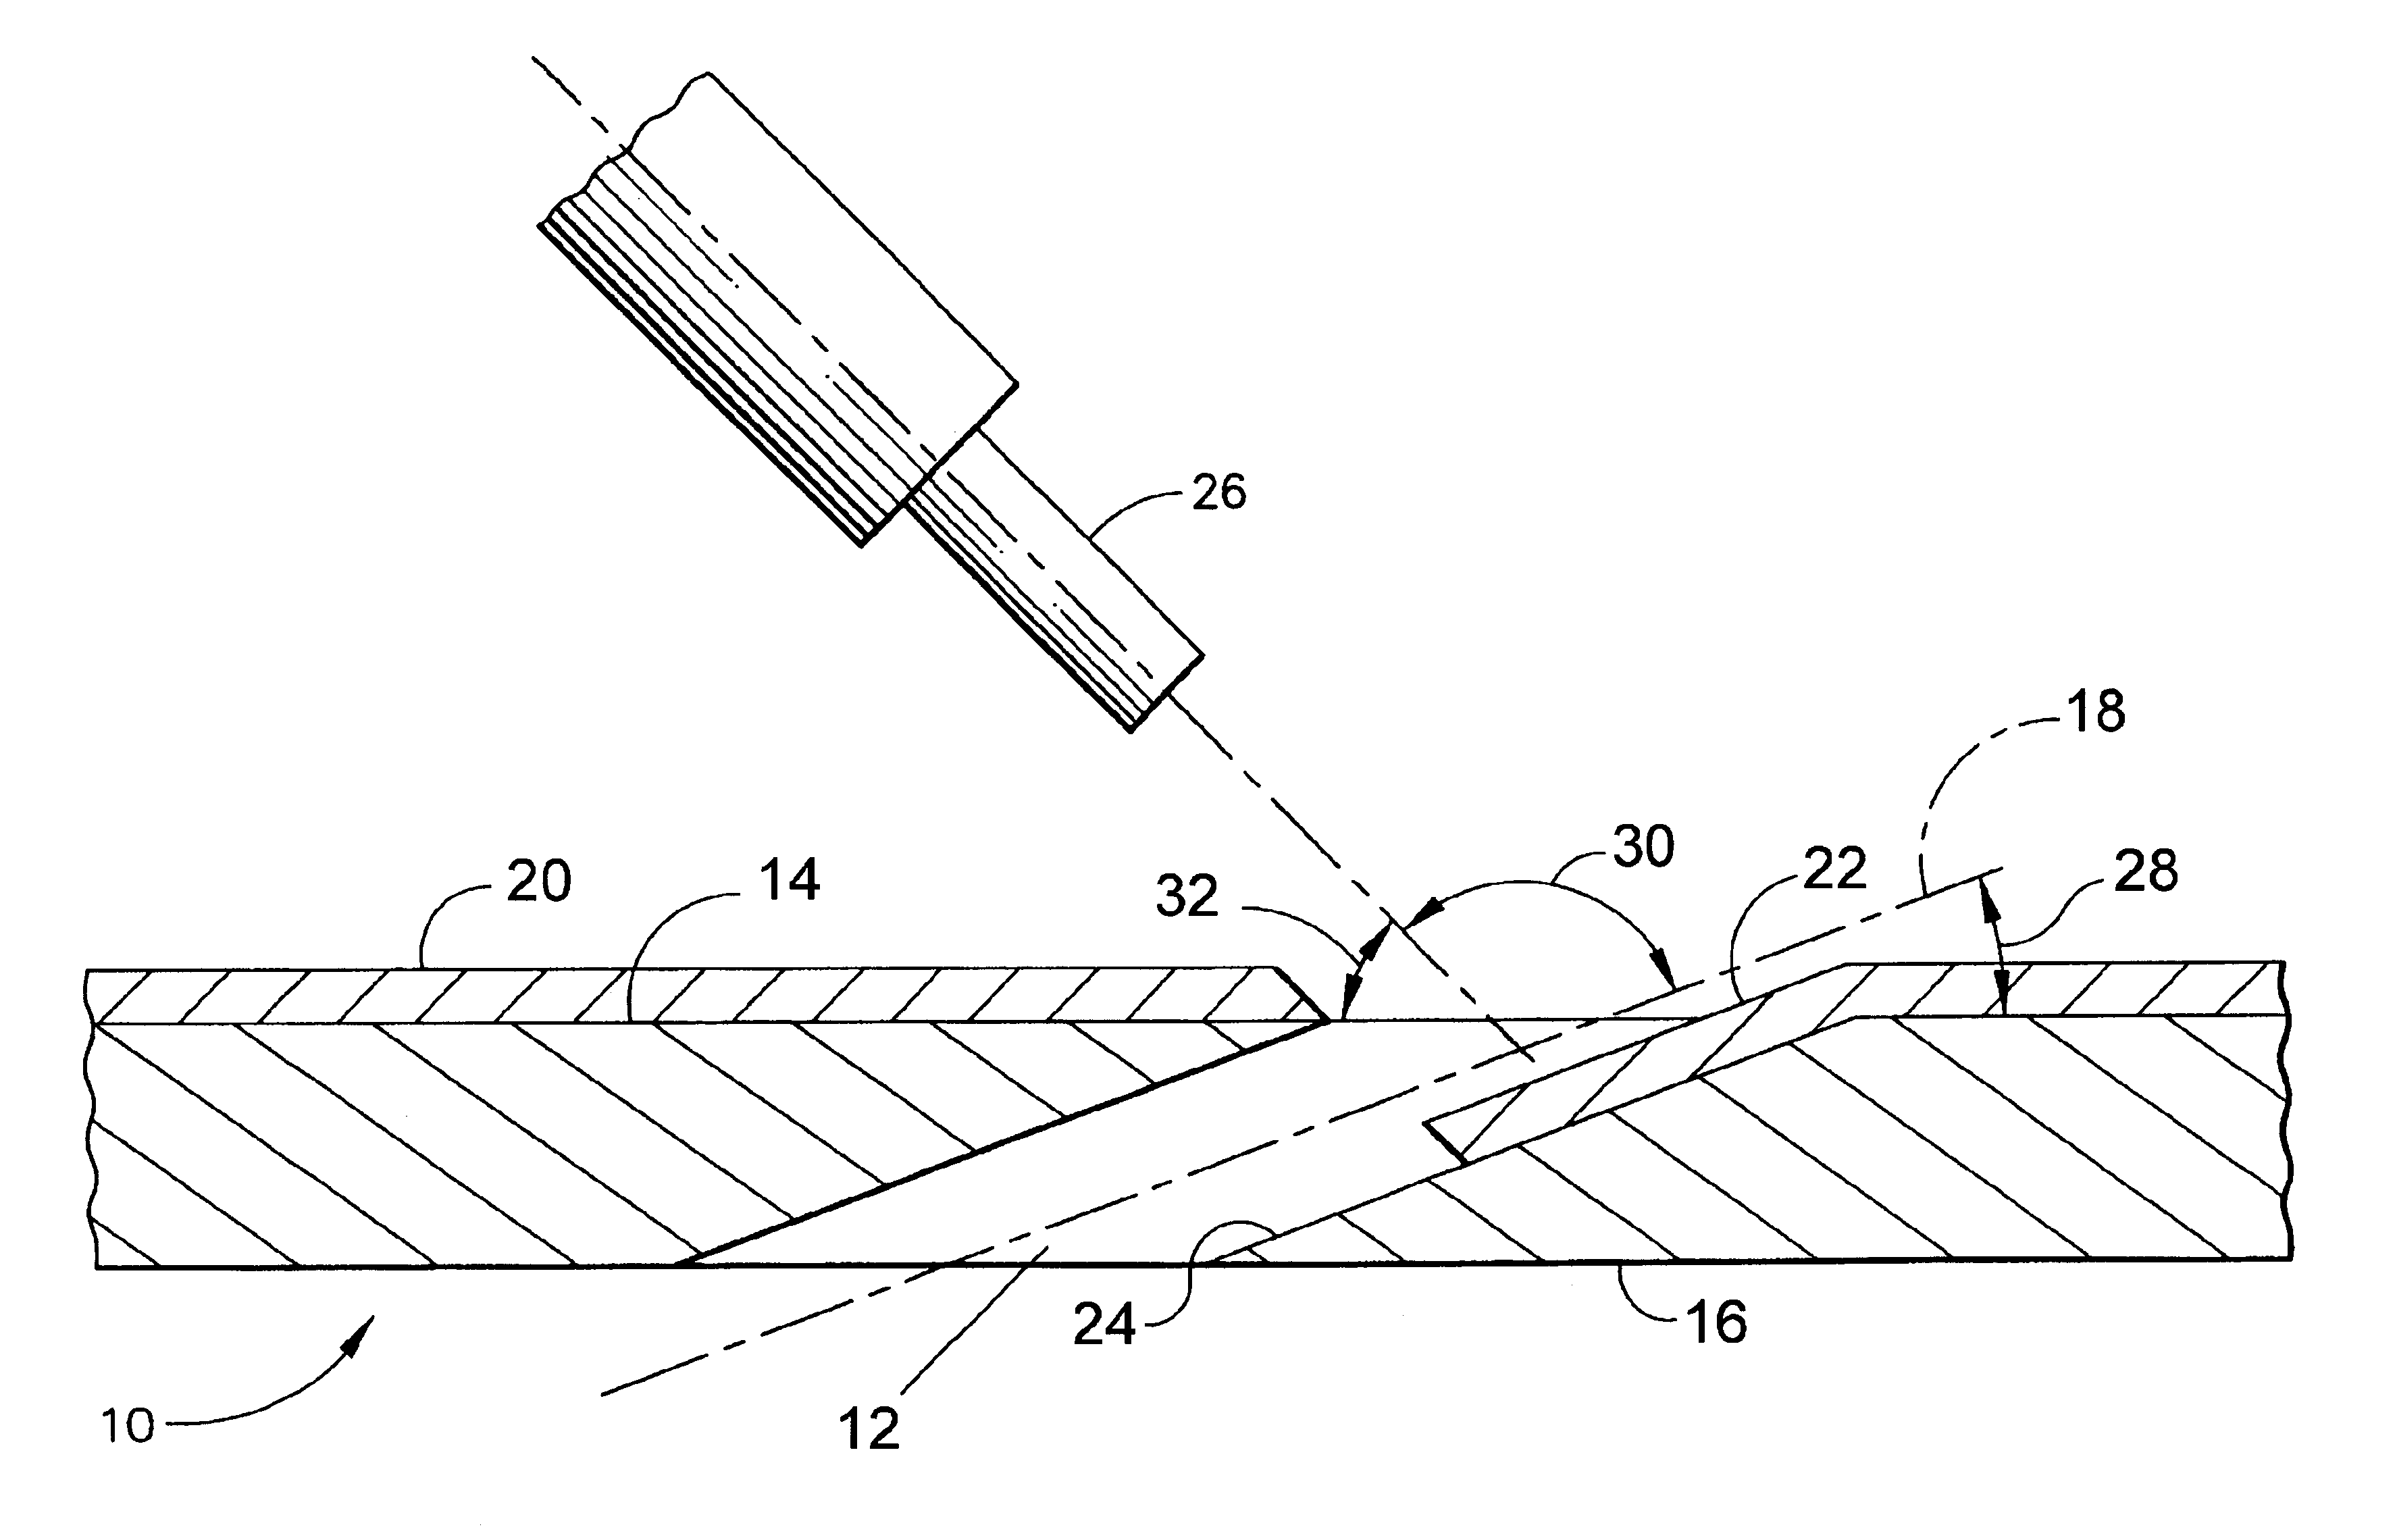 Coated component with through-hole having improved surface finish